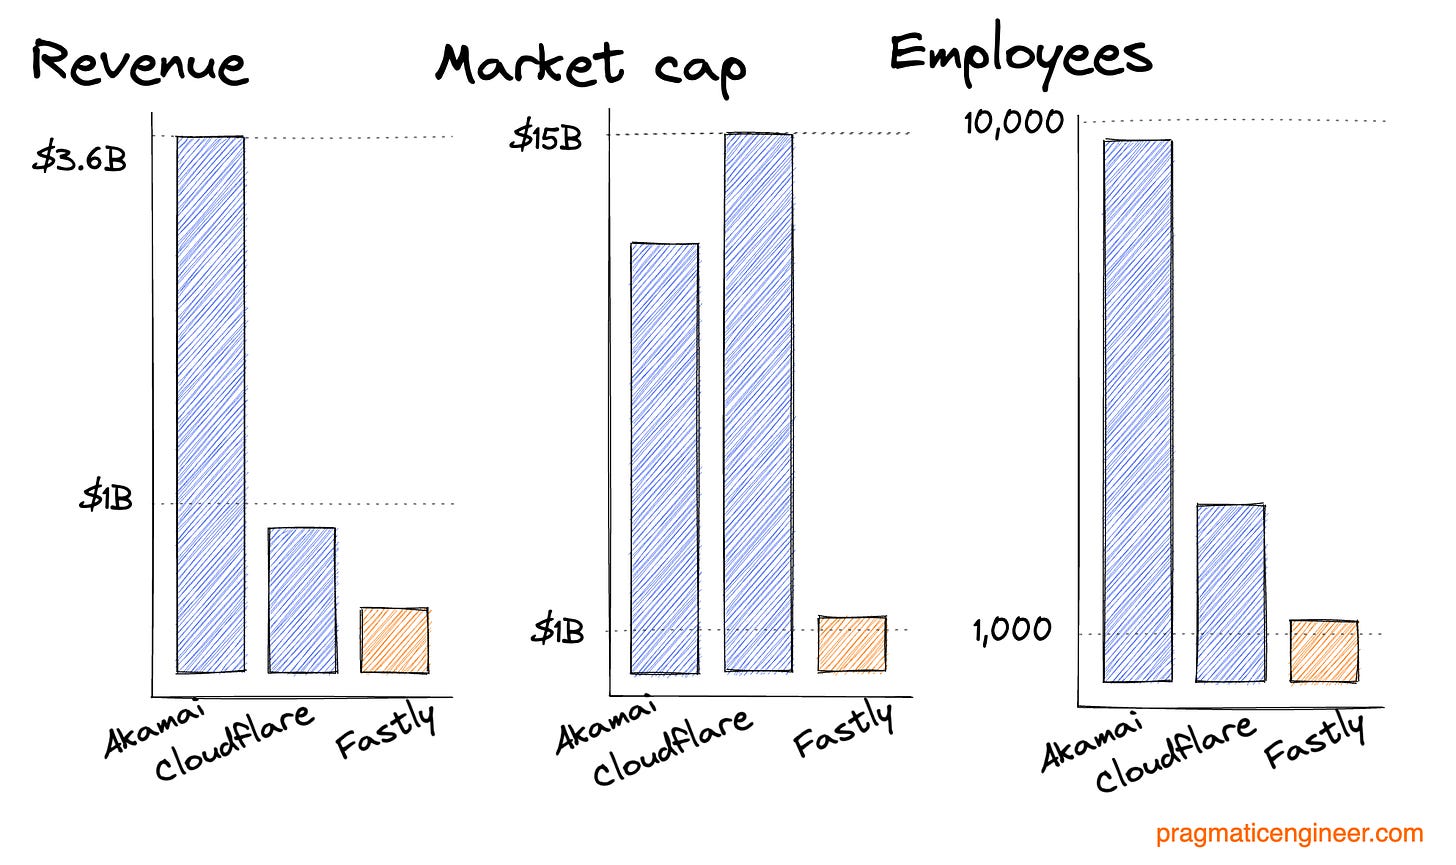 Comparing the revenue, market cap and the number of employees between Akamai, Cloudflare and Fastly